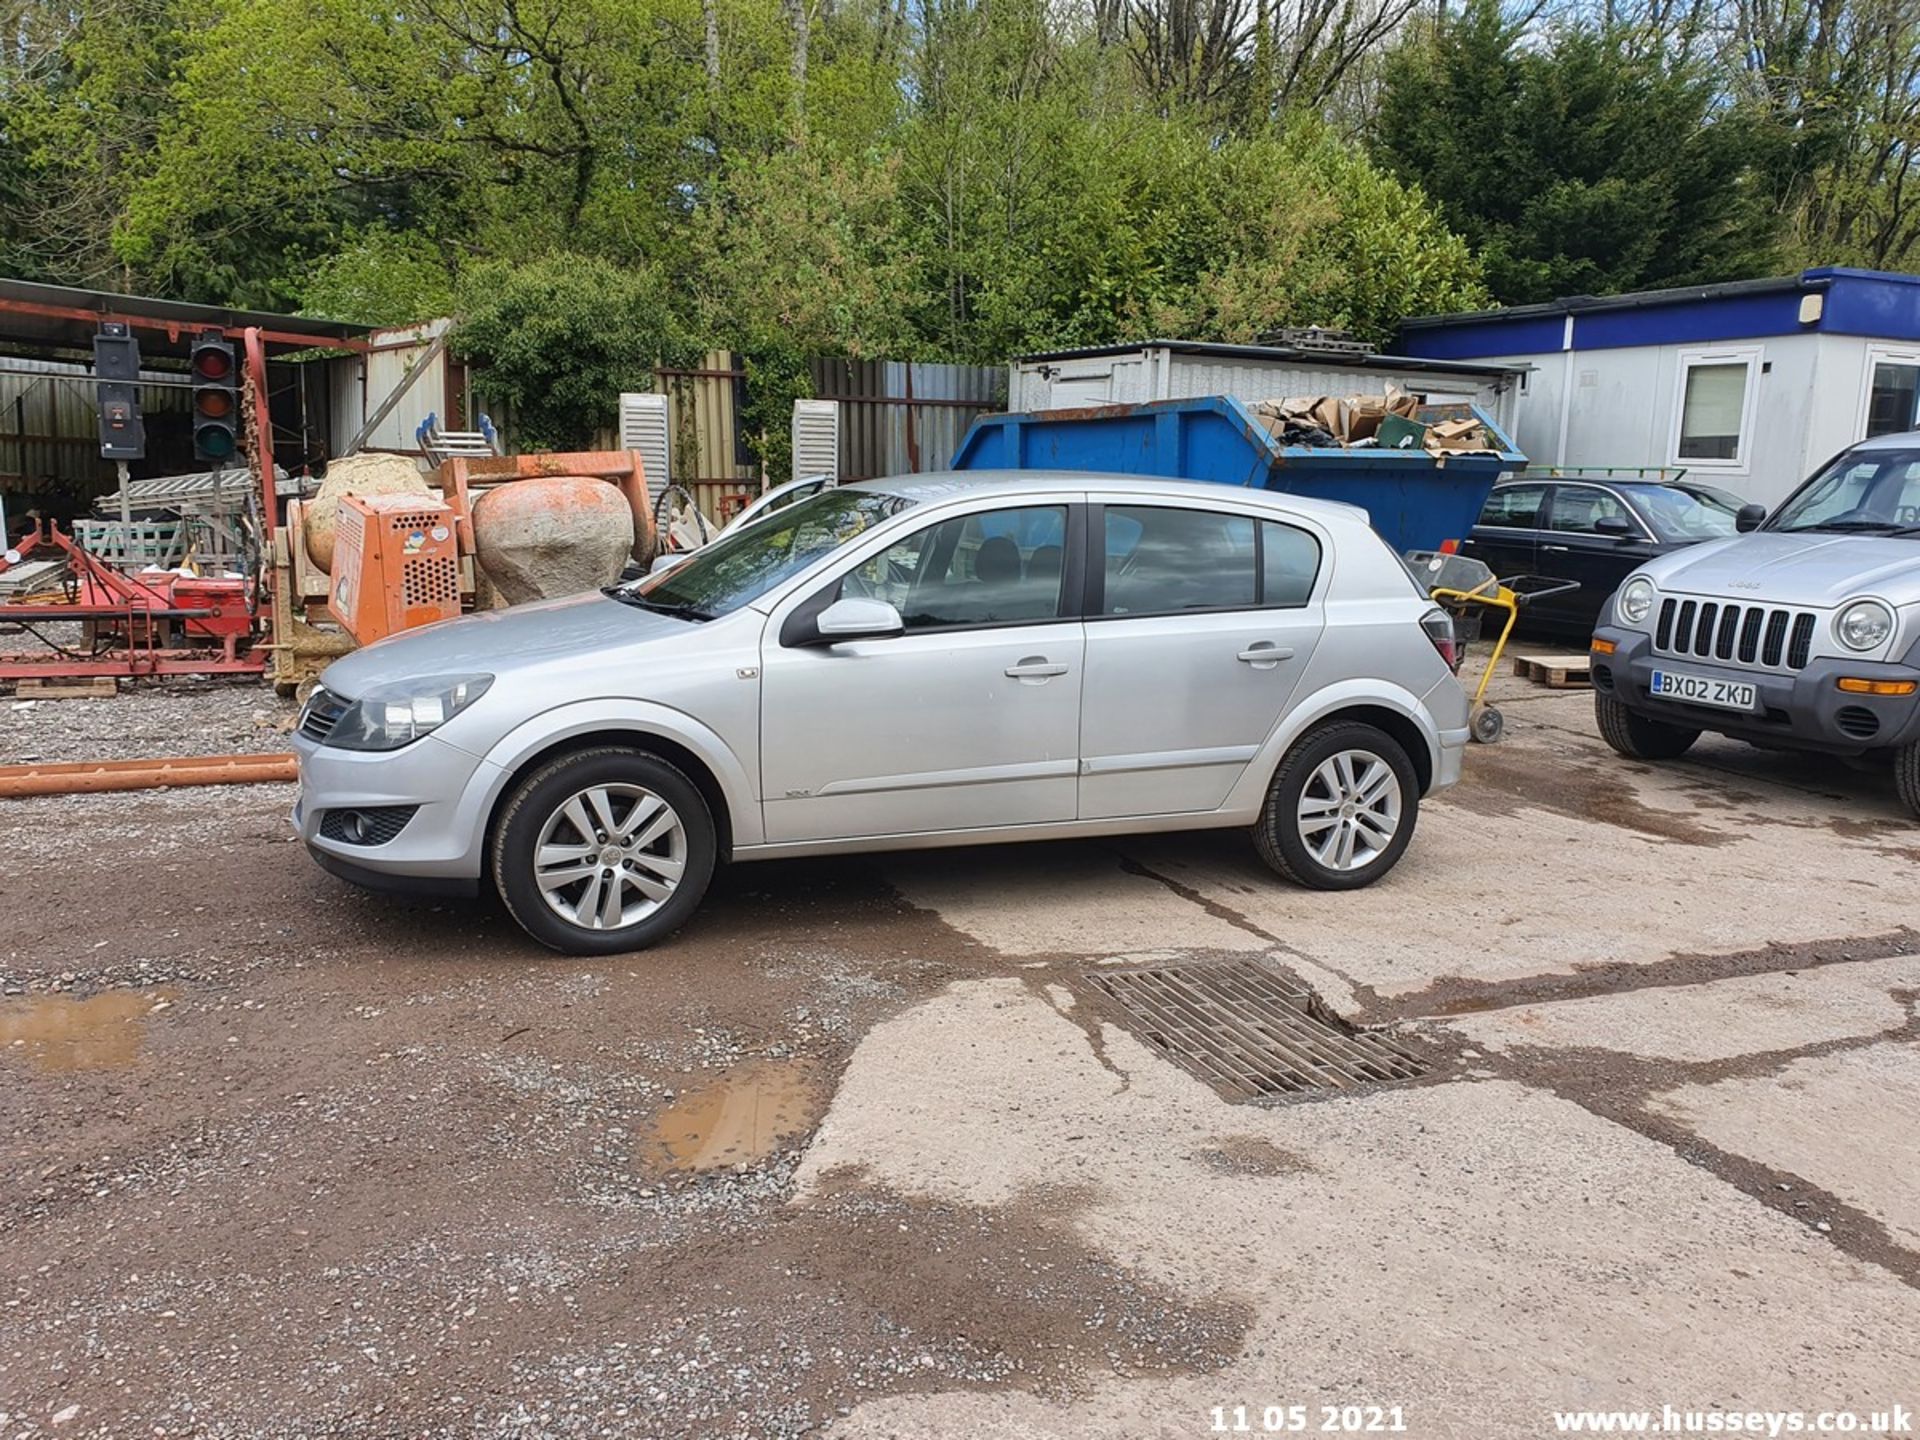 09/09 VAUXHALL ASTRA SXI TWINPORT - 1364cc 5dr Hatchback (Silver, 101k) - Image 2 of 13